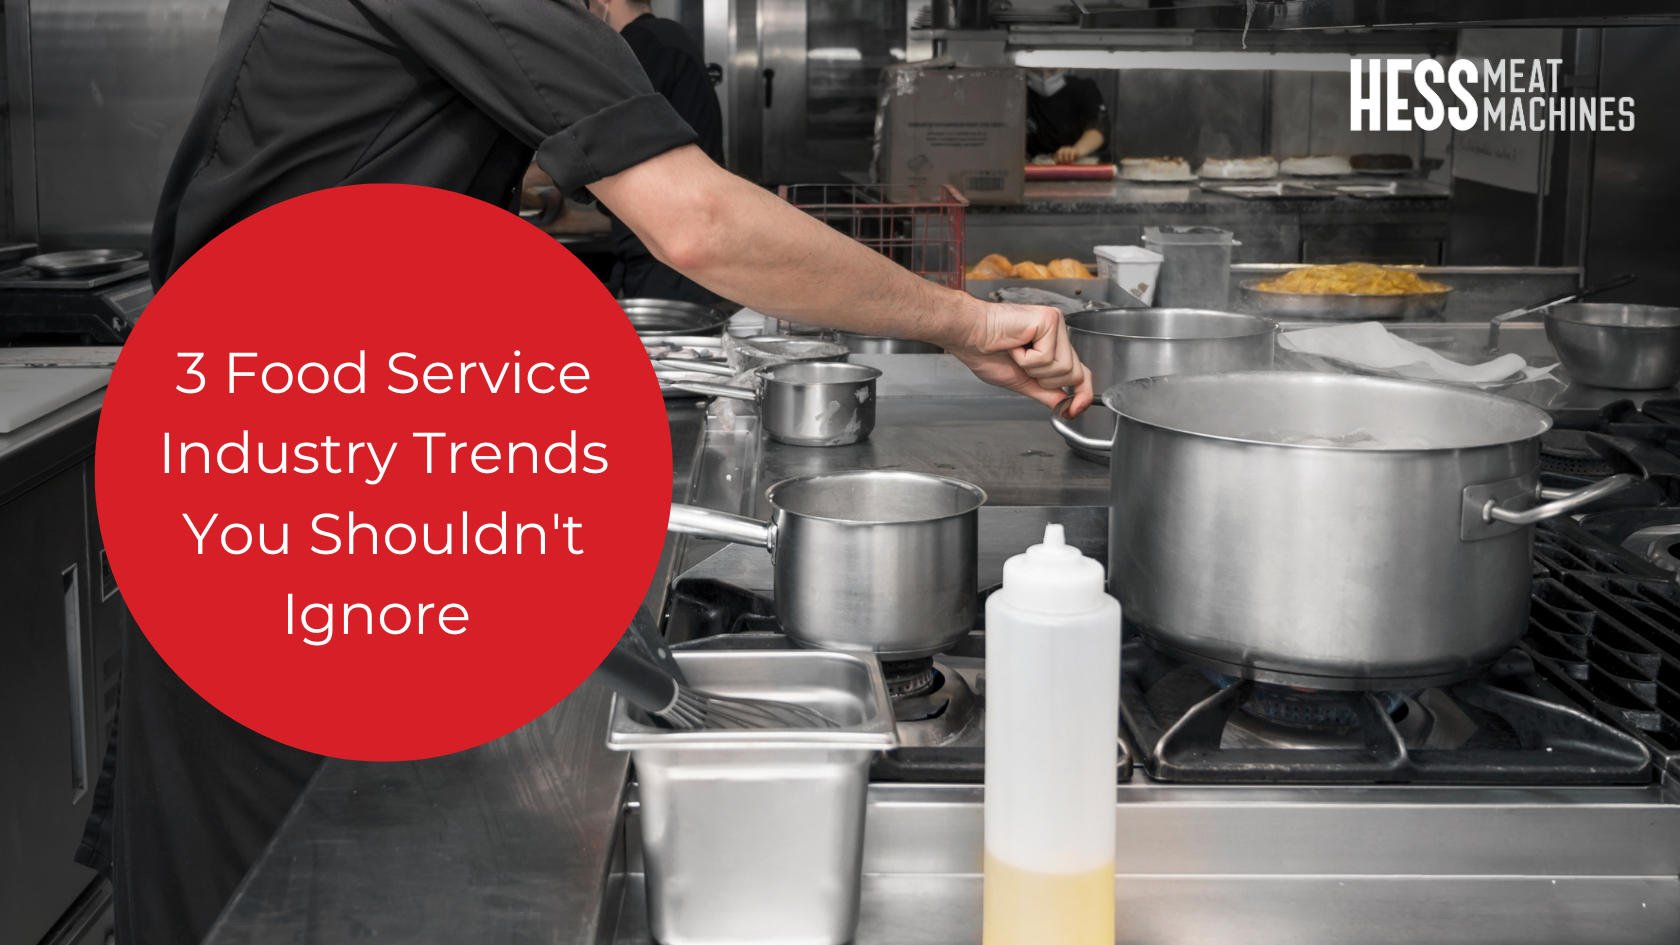 3 Food Industry Trends That You Shouldn't Ignore Graphic